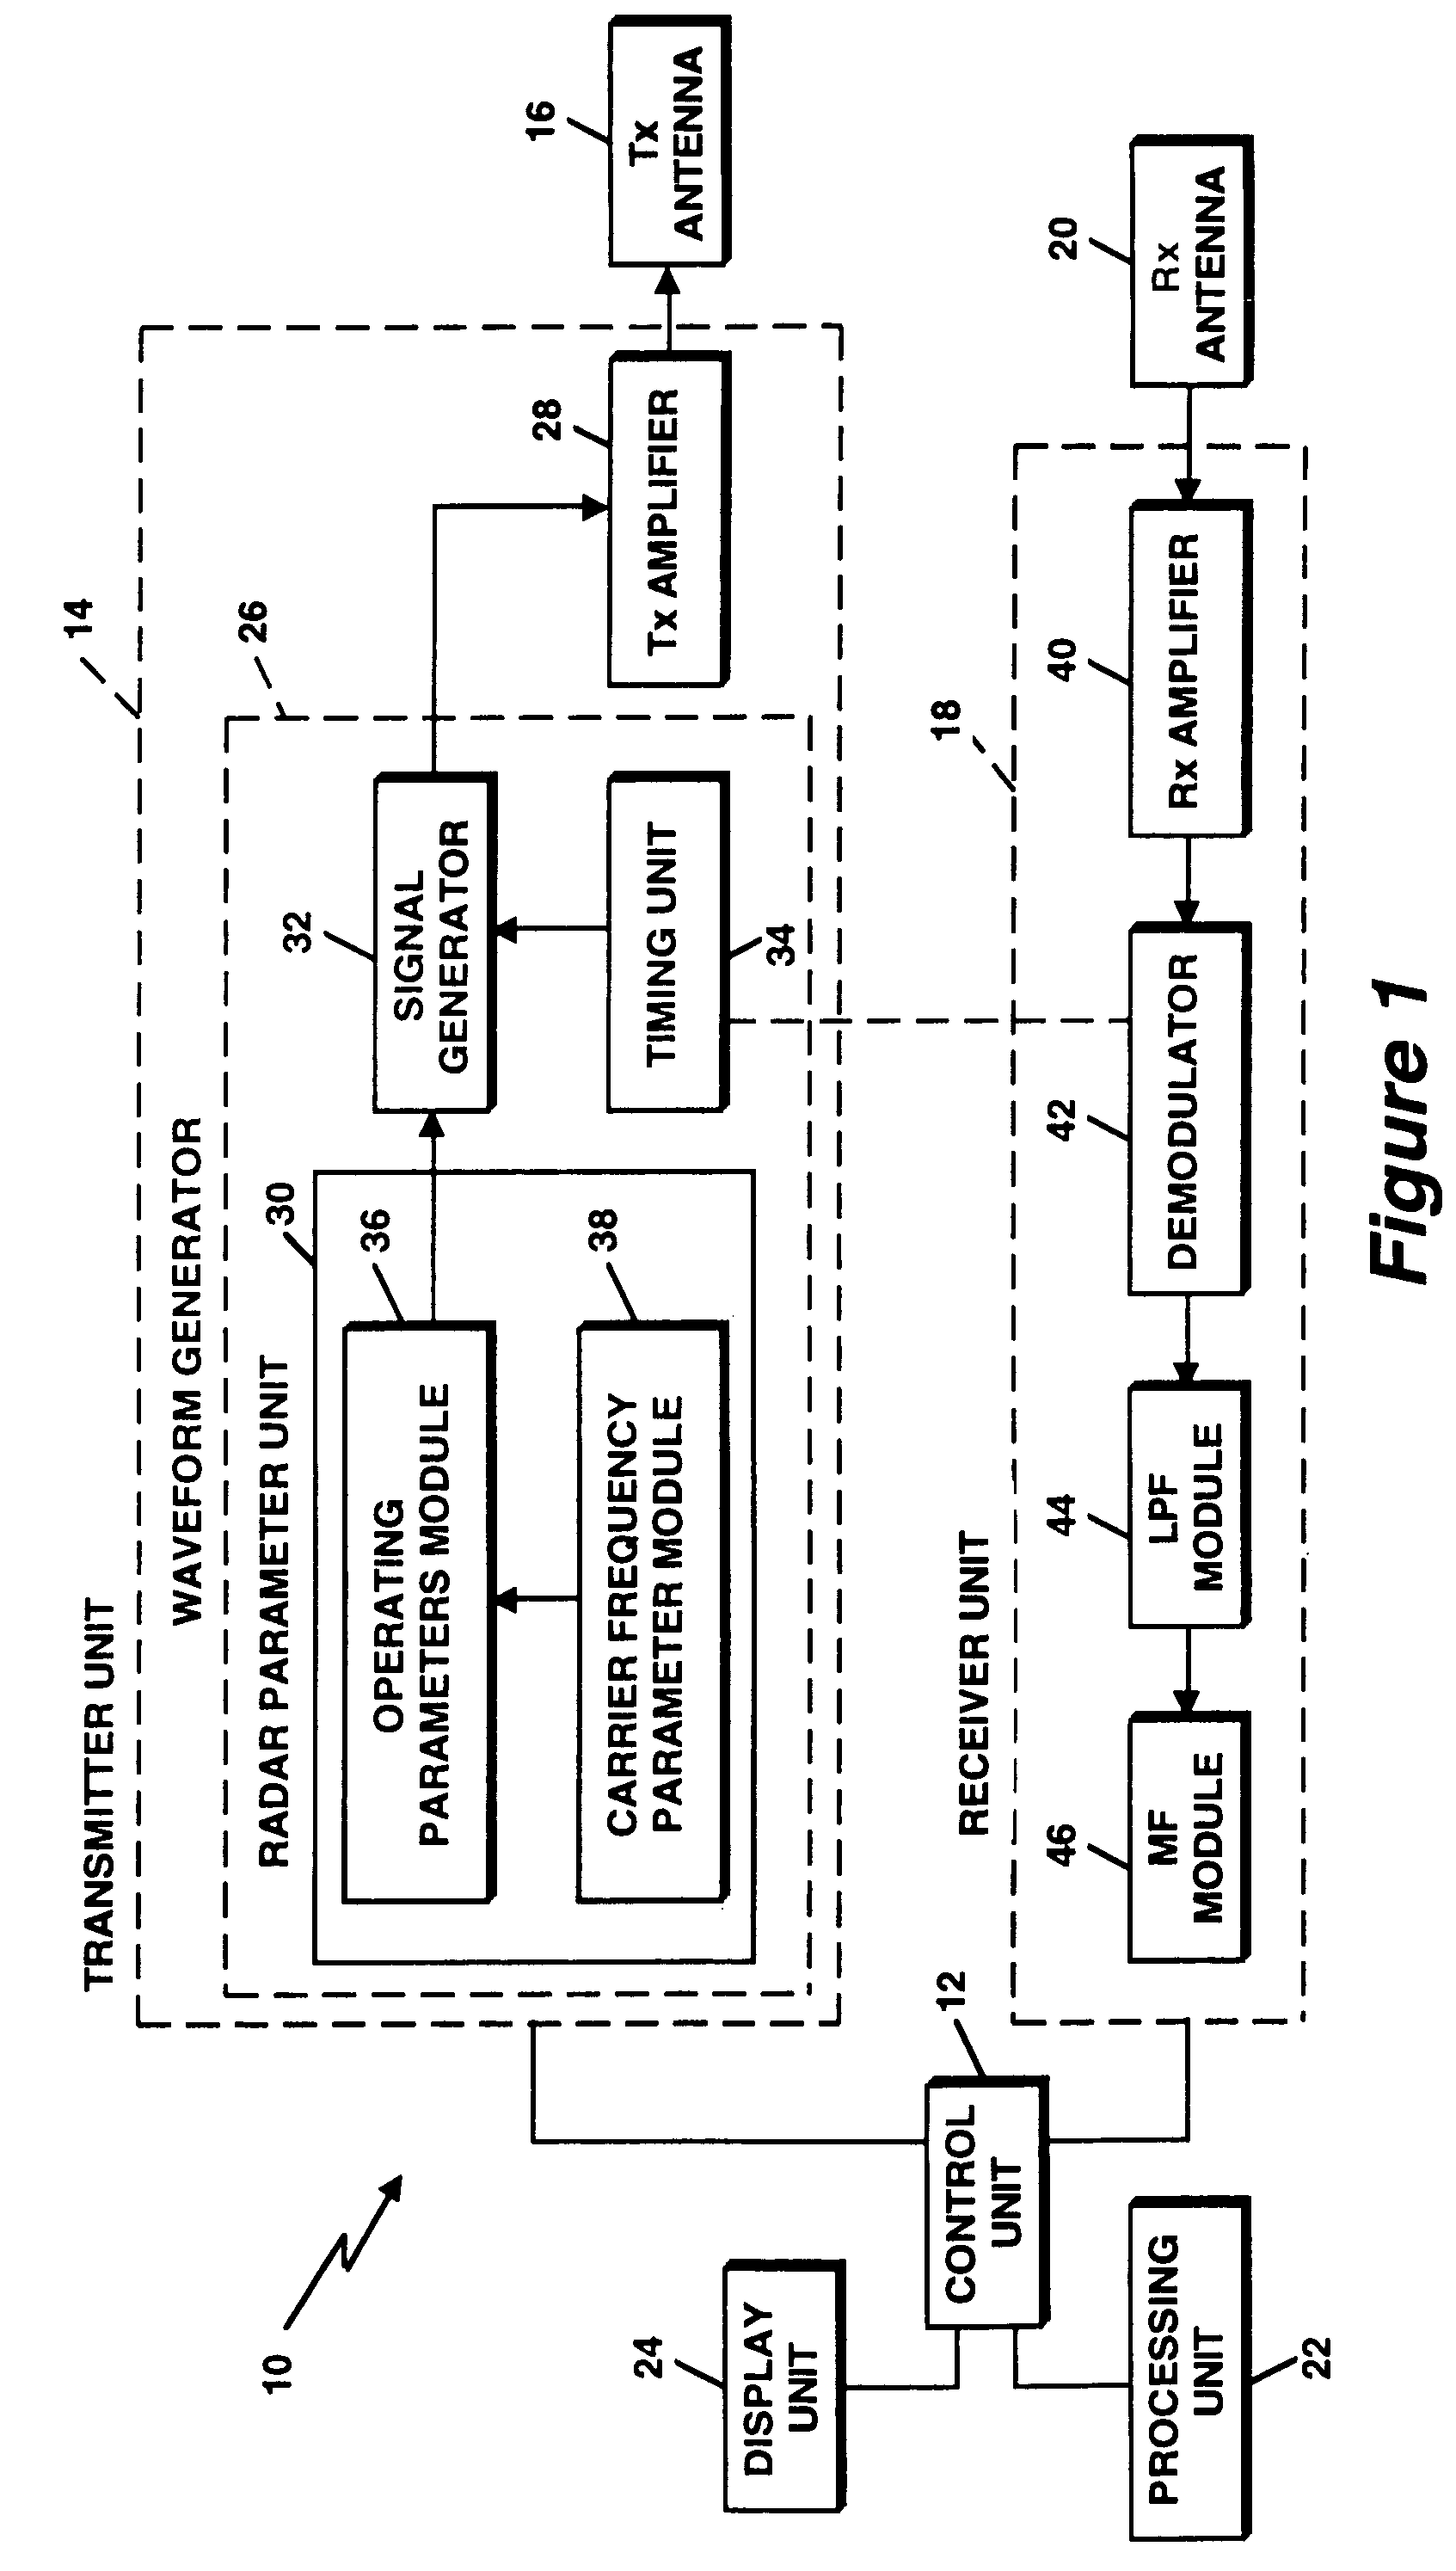 System and method for concurrent operation of multiple radar or active sonar systems on a common frequency